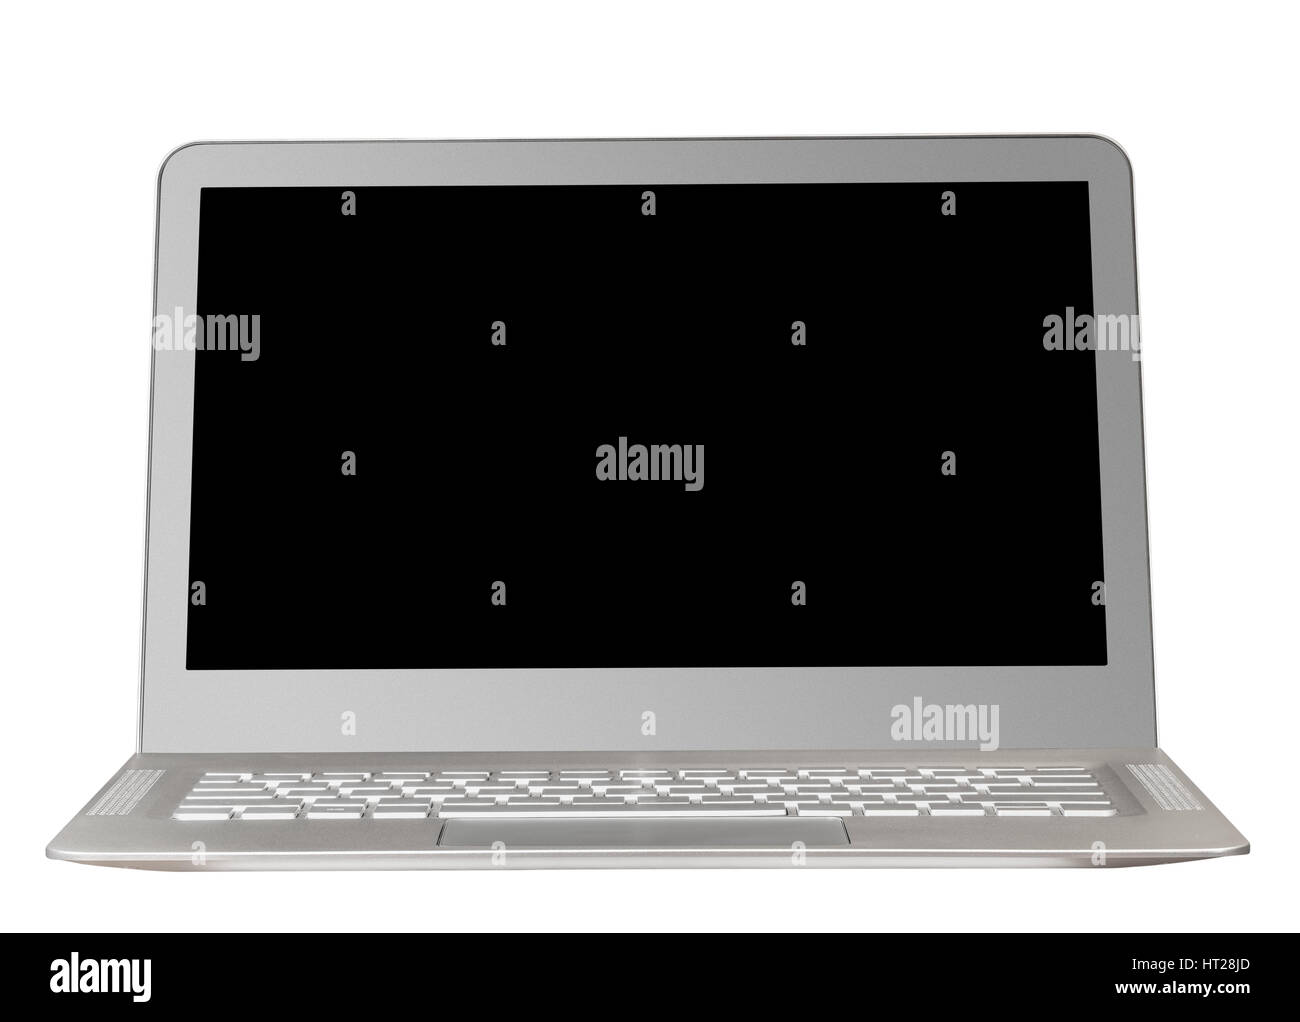 Isolated cut out of modern thin profile metal laptop against white background Stock Photo